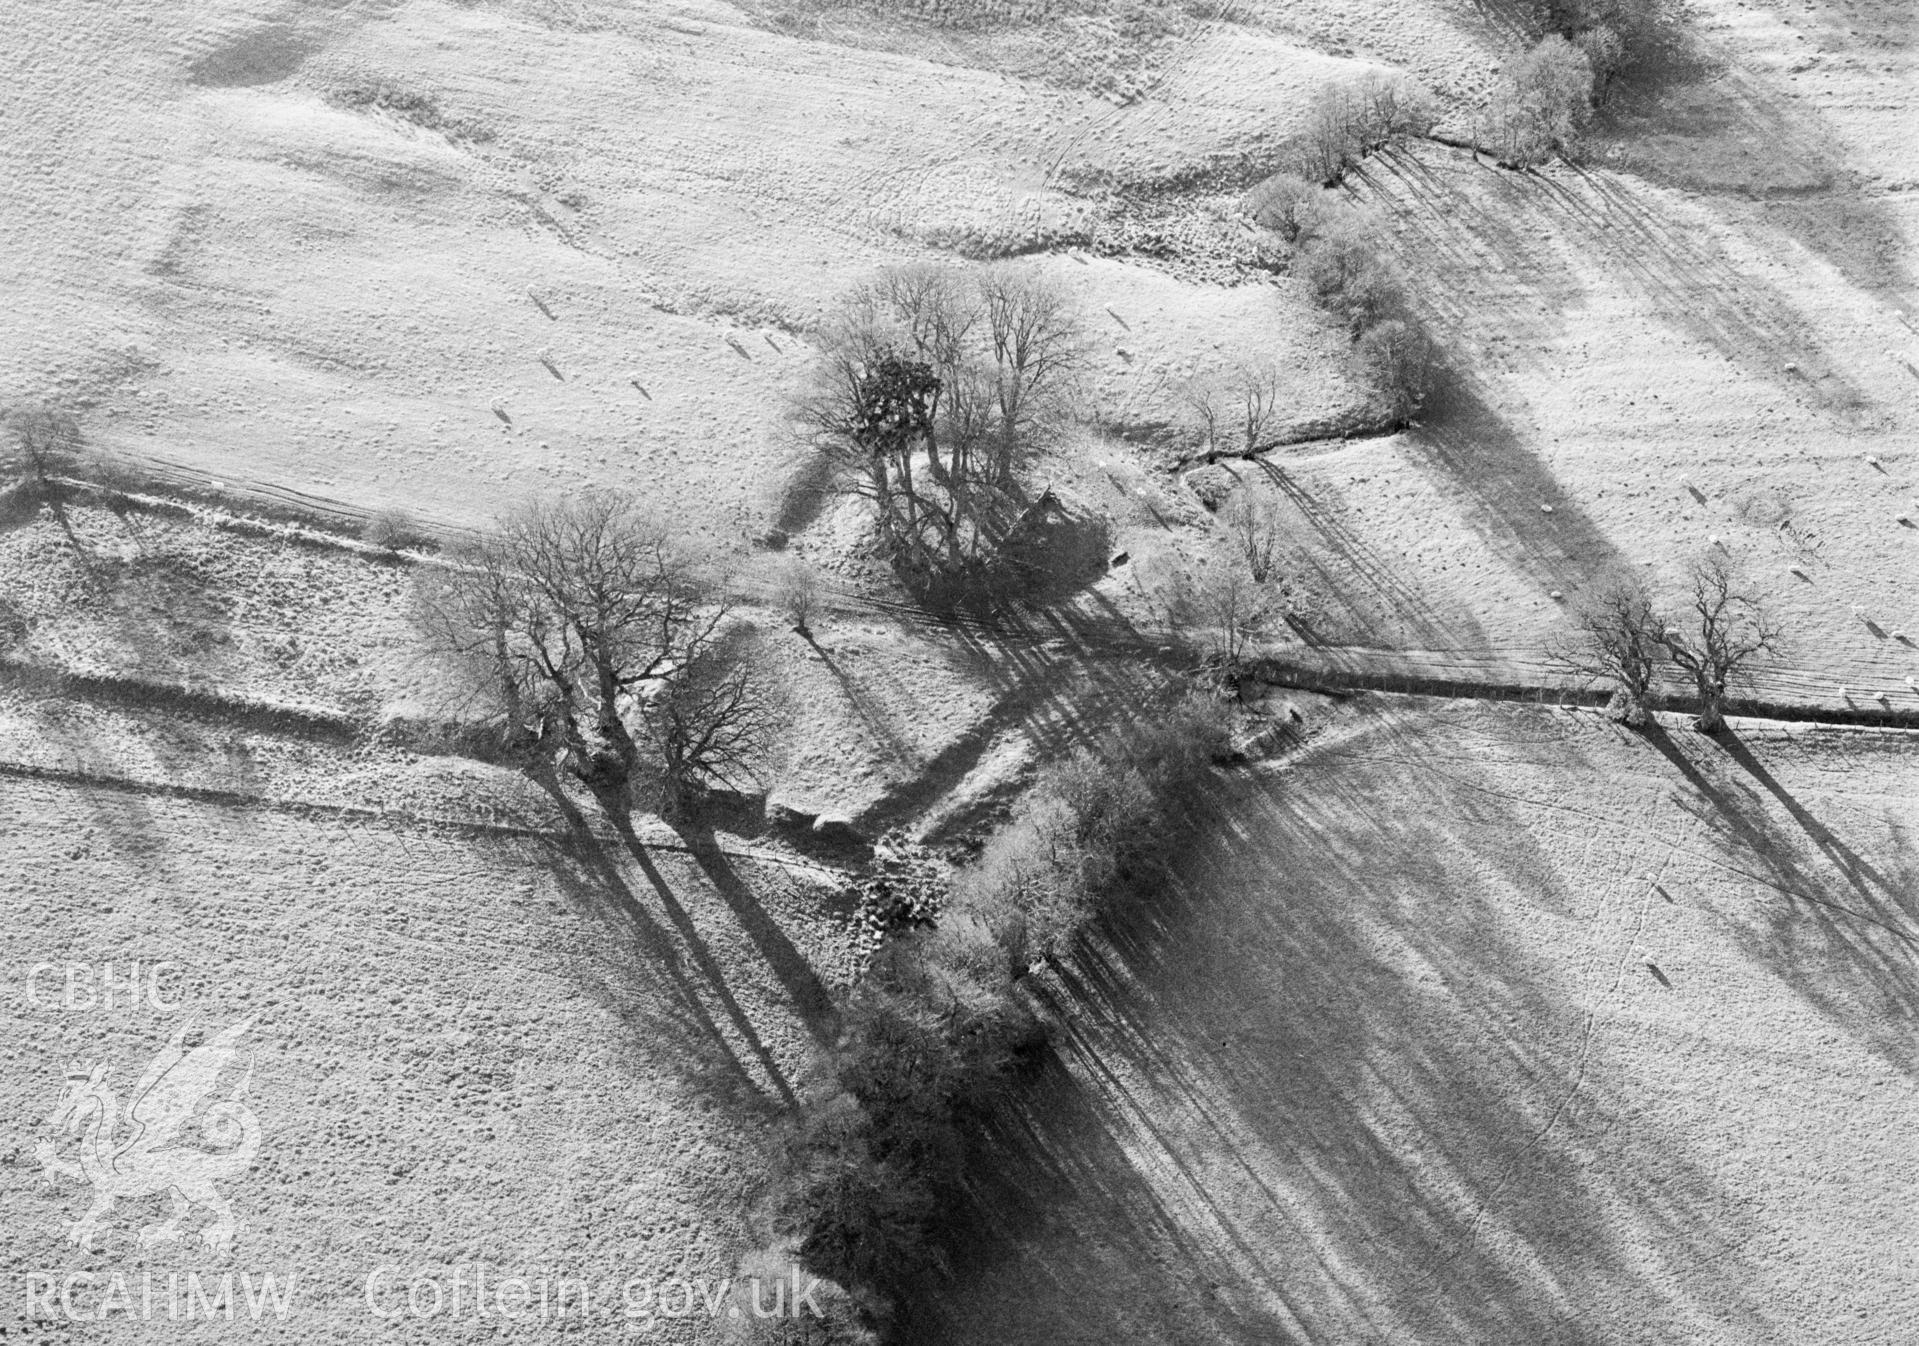 RCAHMW black and white oblique aerial photograph of Castle Nimble, taken by C R Musson, 27/12/1996.